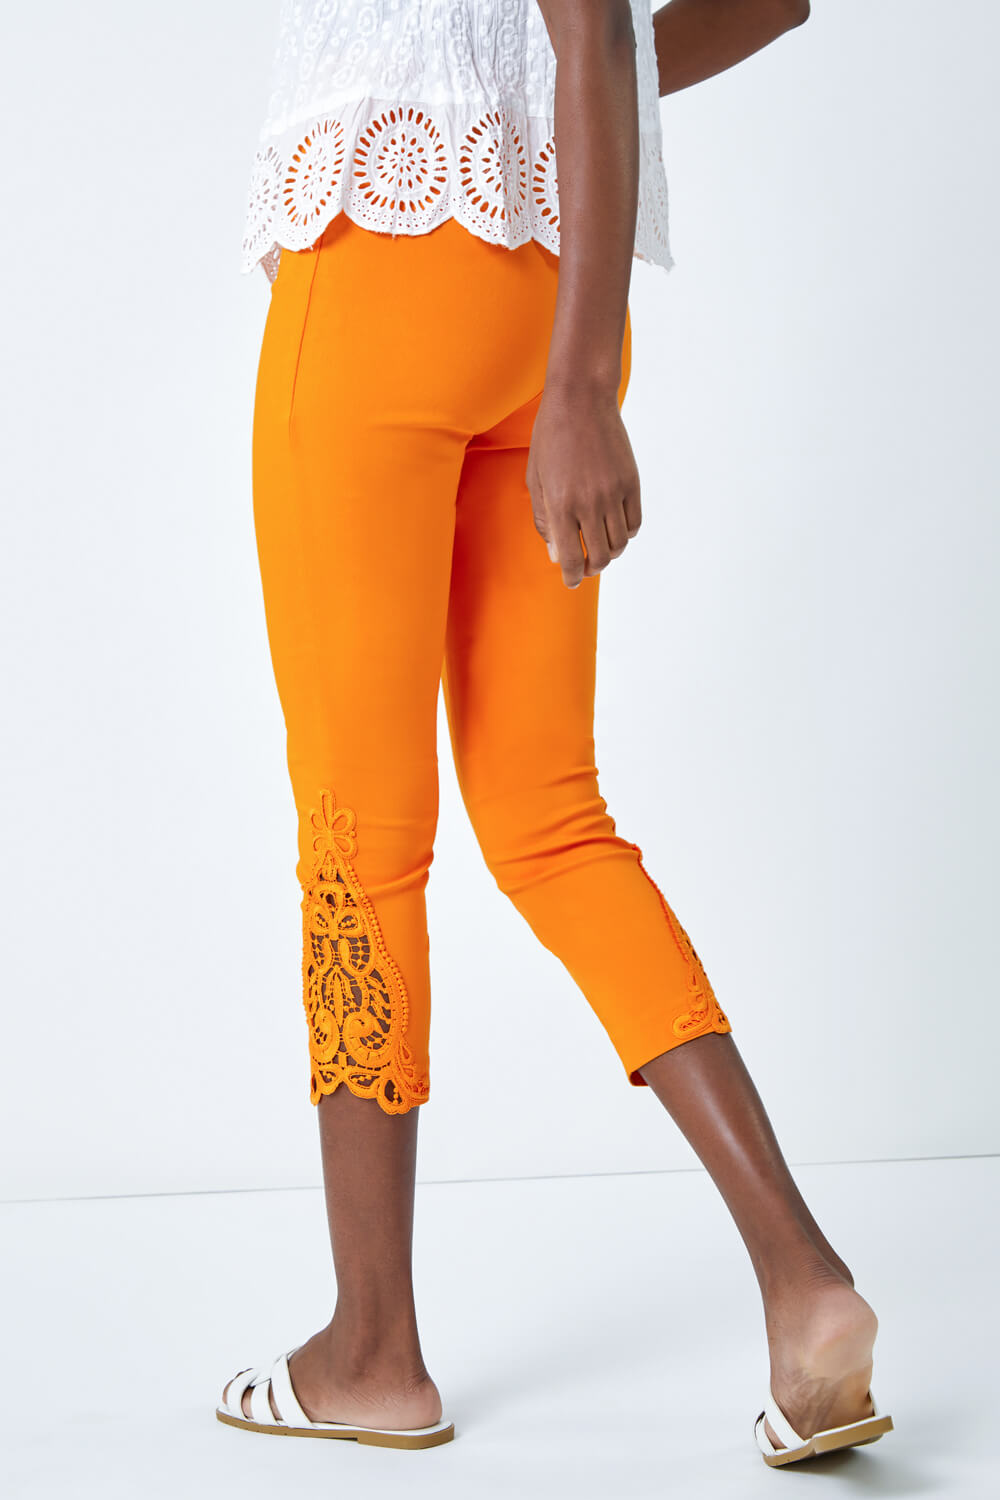 ORANGE Lace Insert Crop Stretch Trousers, Image 3 of 5